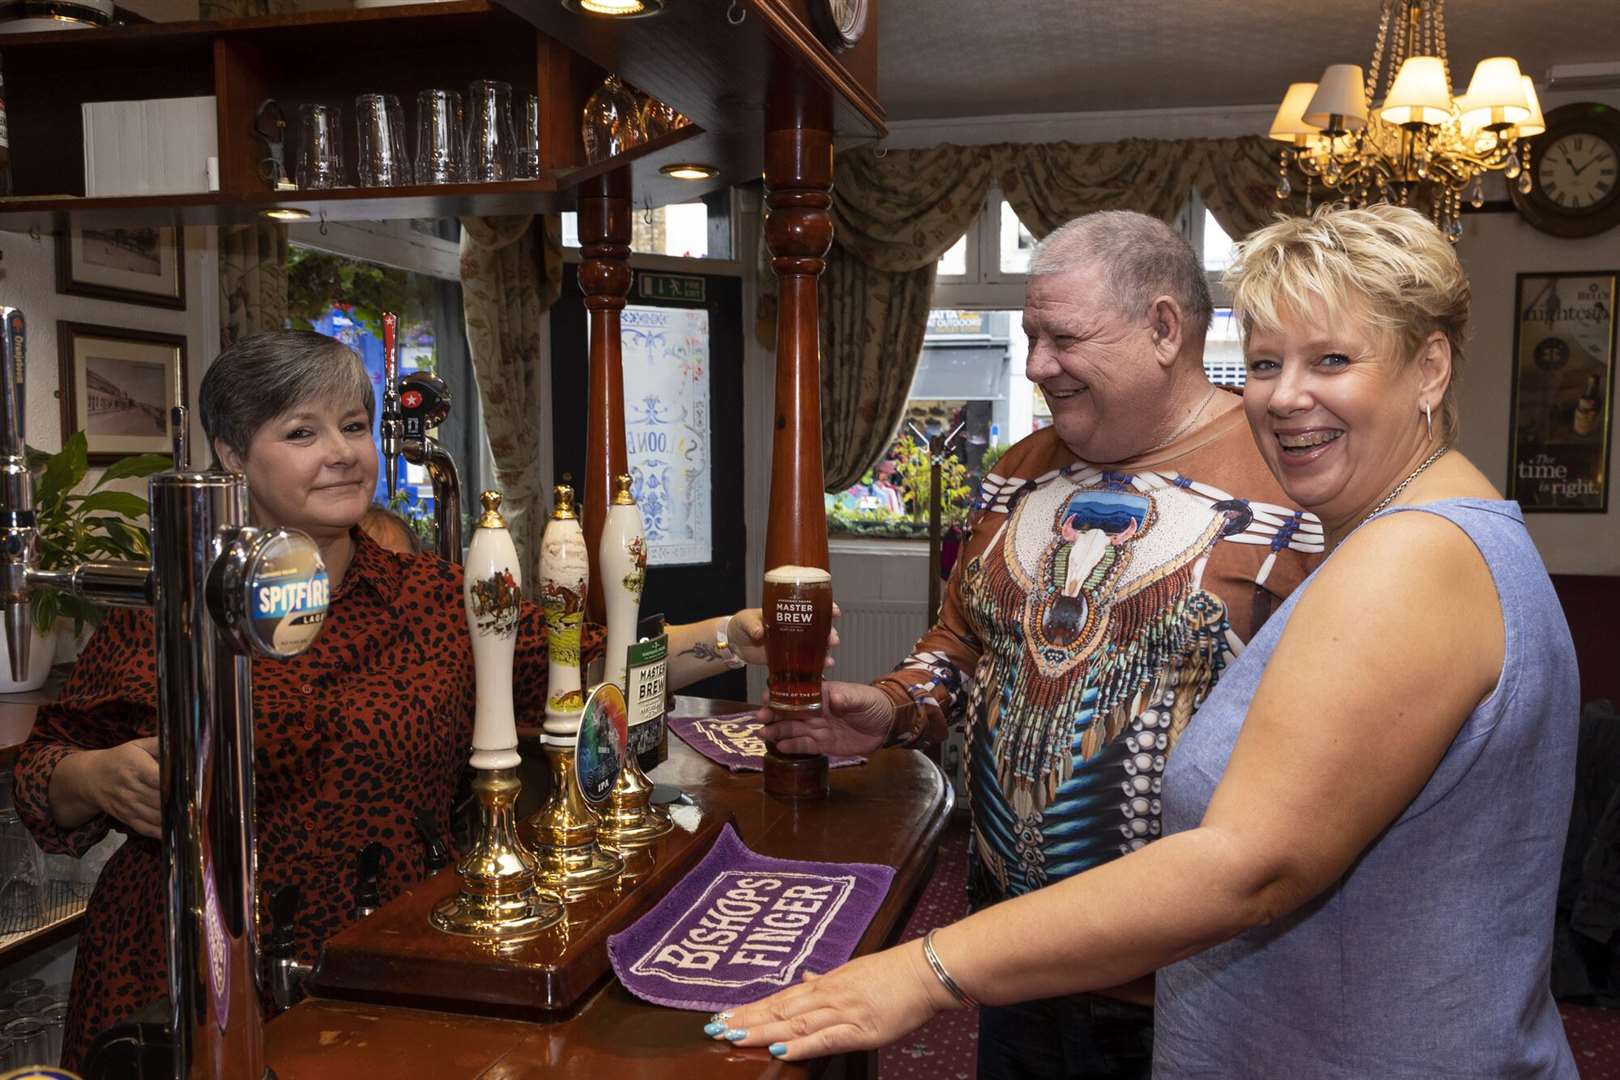 The Rose Inn is the second in the town under the stewardship of Georgina Paxton. Picture: Shepherd Neame/Martin Apps